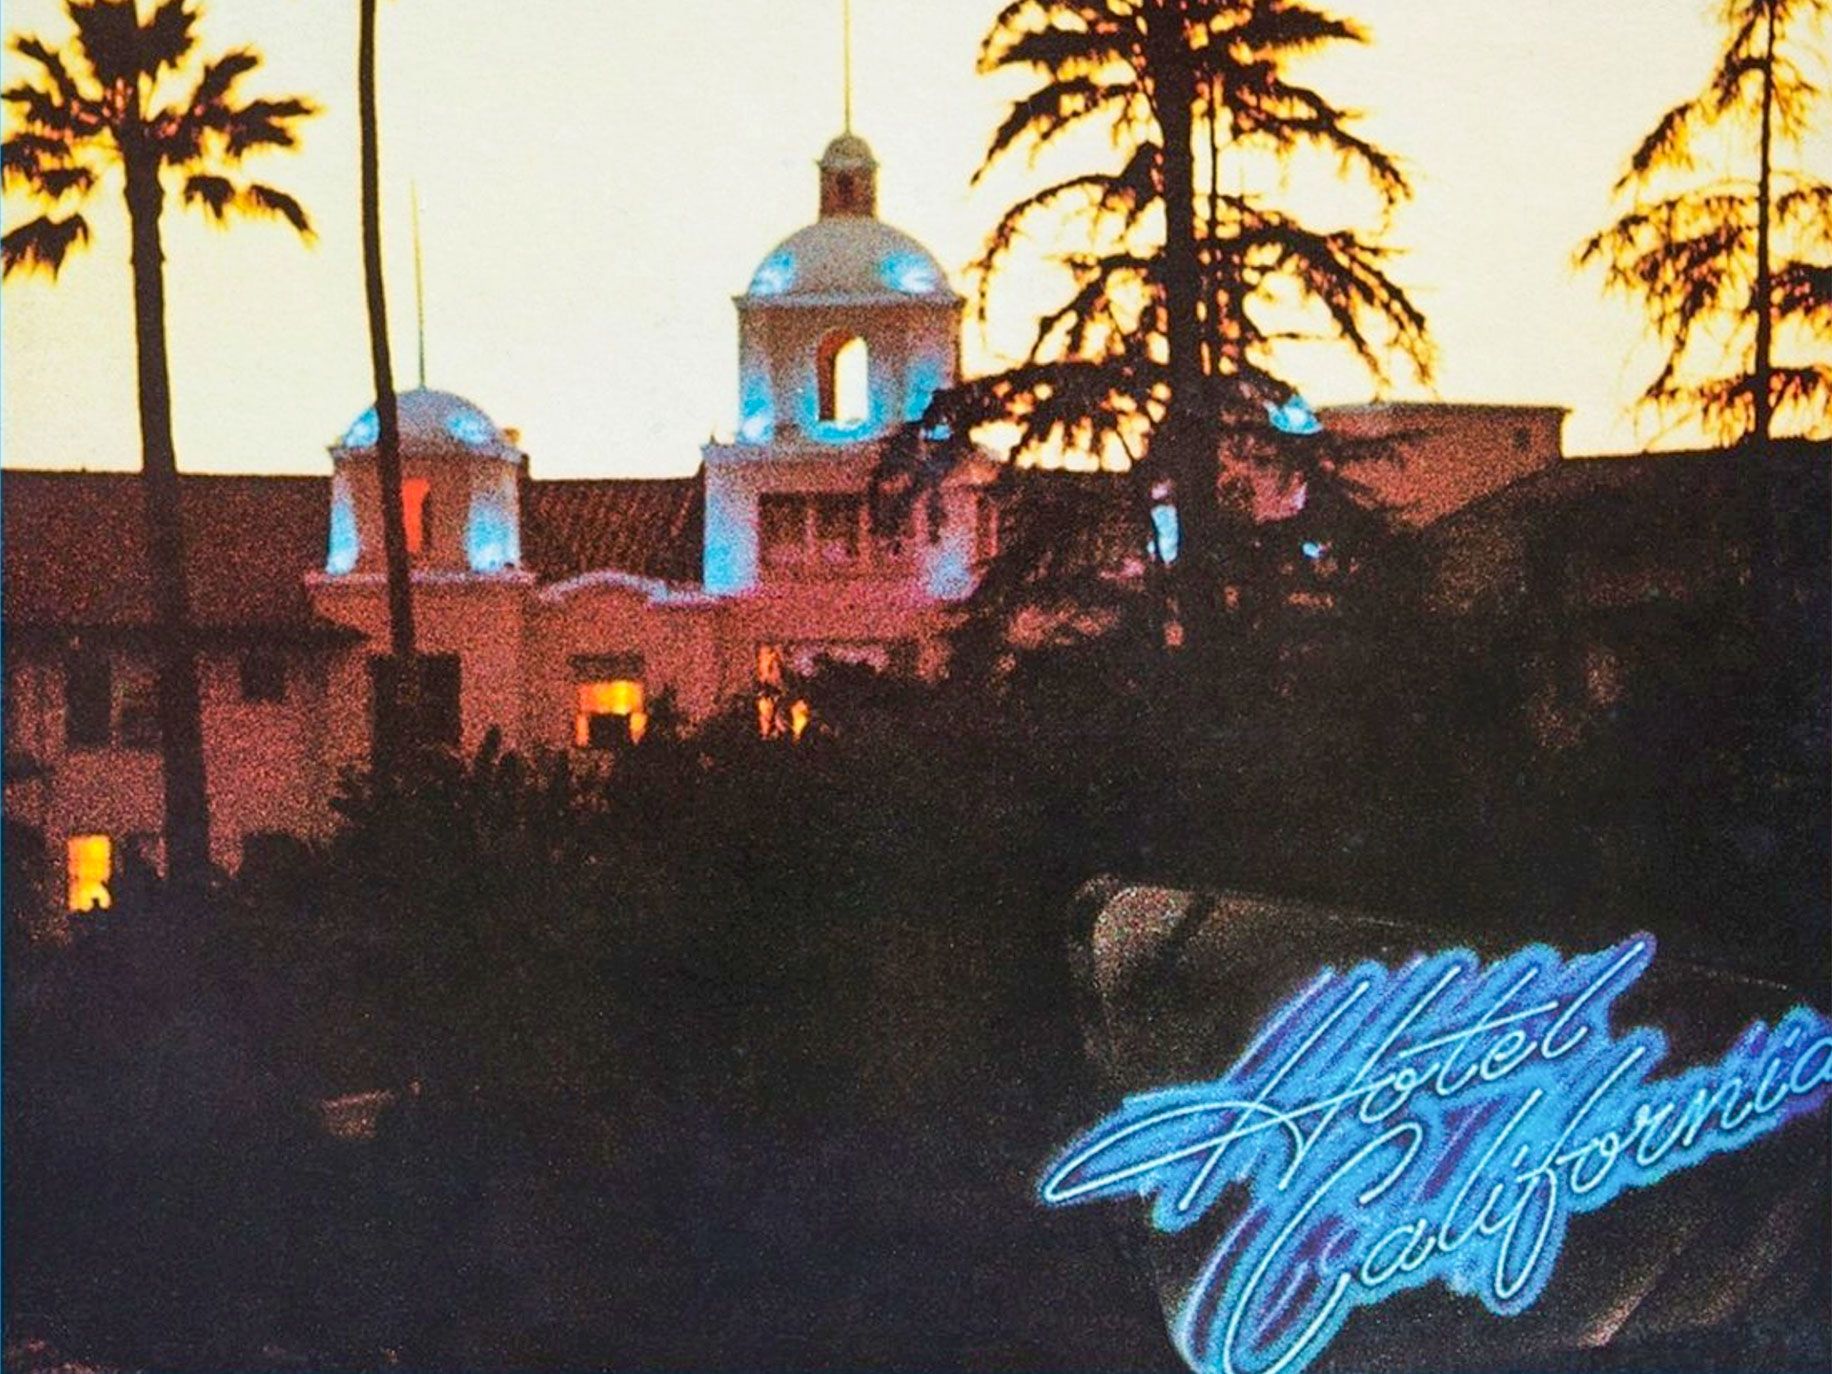 Hotel California By Eagles Released in 1976 Attracts Oldies Music Lovers.